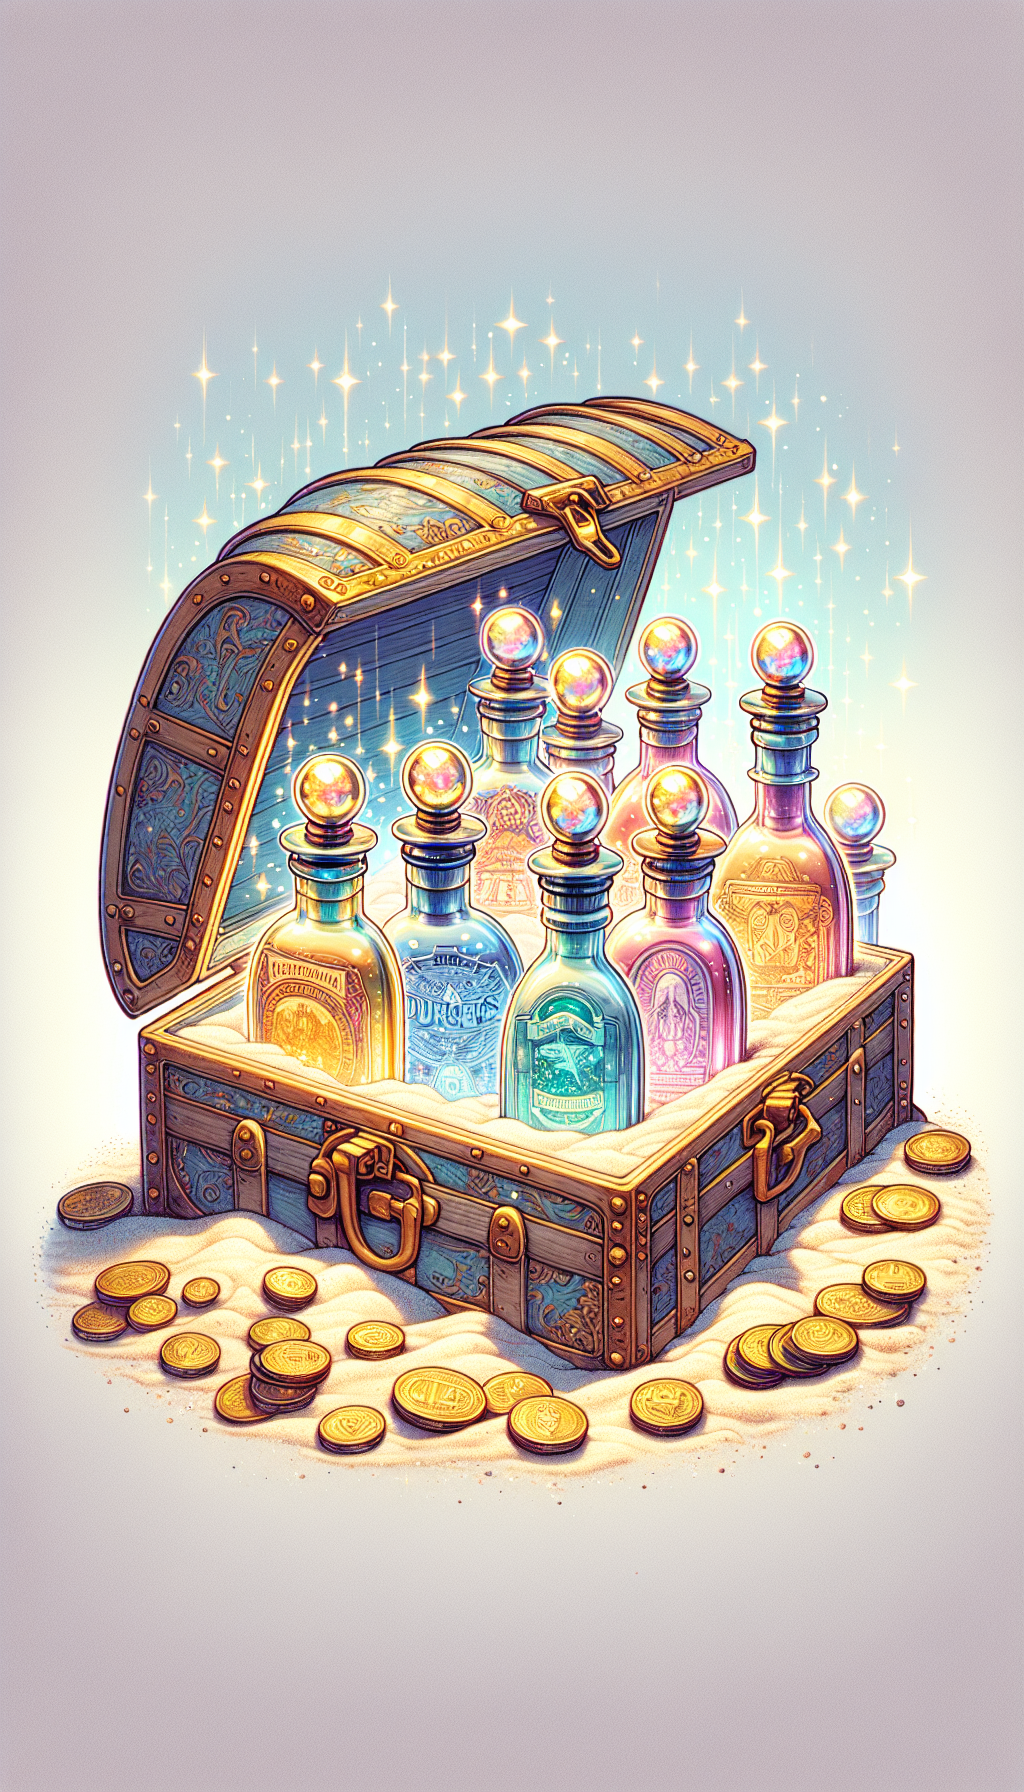 An illustration of an ornate treasure chest, ajar and softly glowing, partially buried in sand. Within, a variety of Duraglas bottles are captured in mid-hover, encircled by shimmering gold coins and jewels, their labels elegantly depicting eras past. Distinct styles—from watercolor pastels to sharp-edged art deco—meld across bottles, emphasizing their individual worth and historical value.